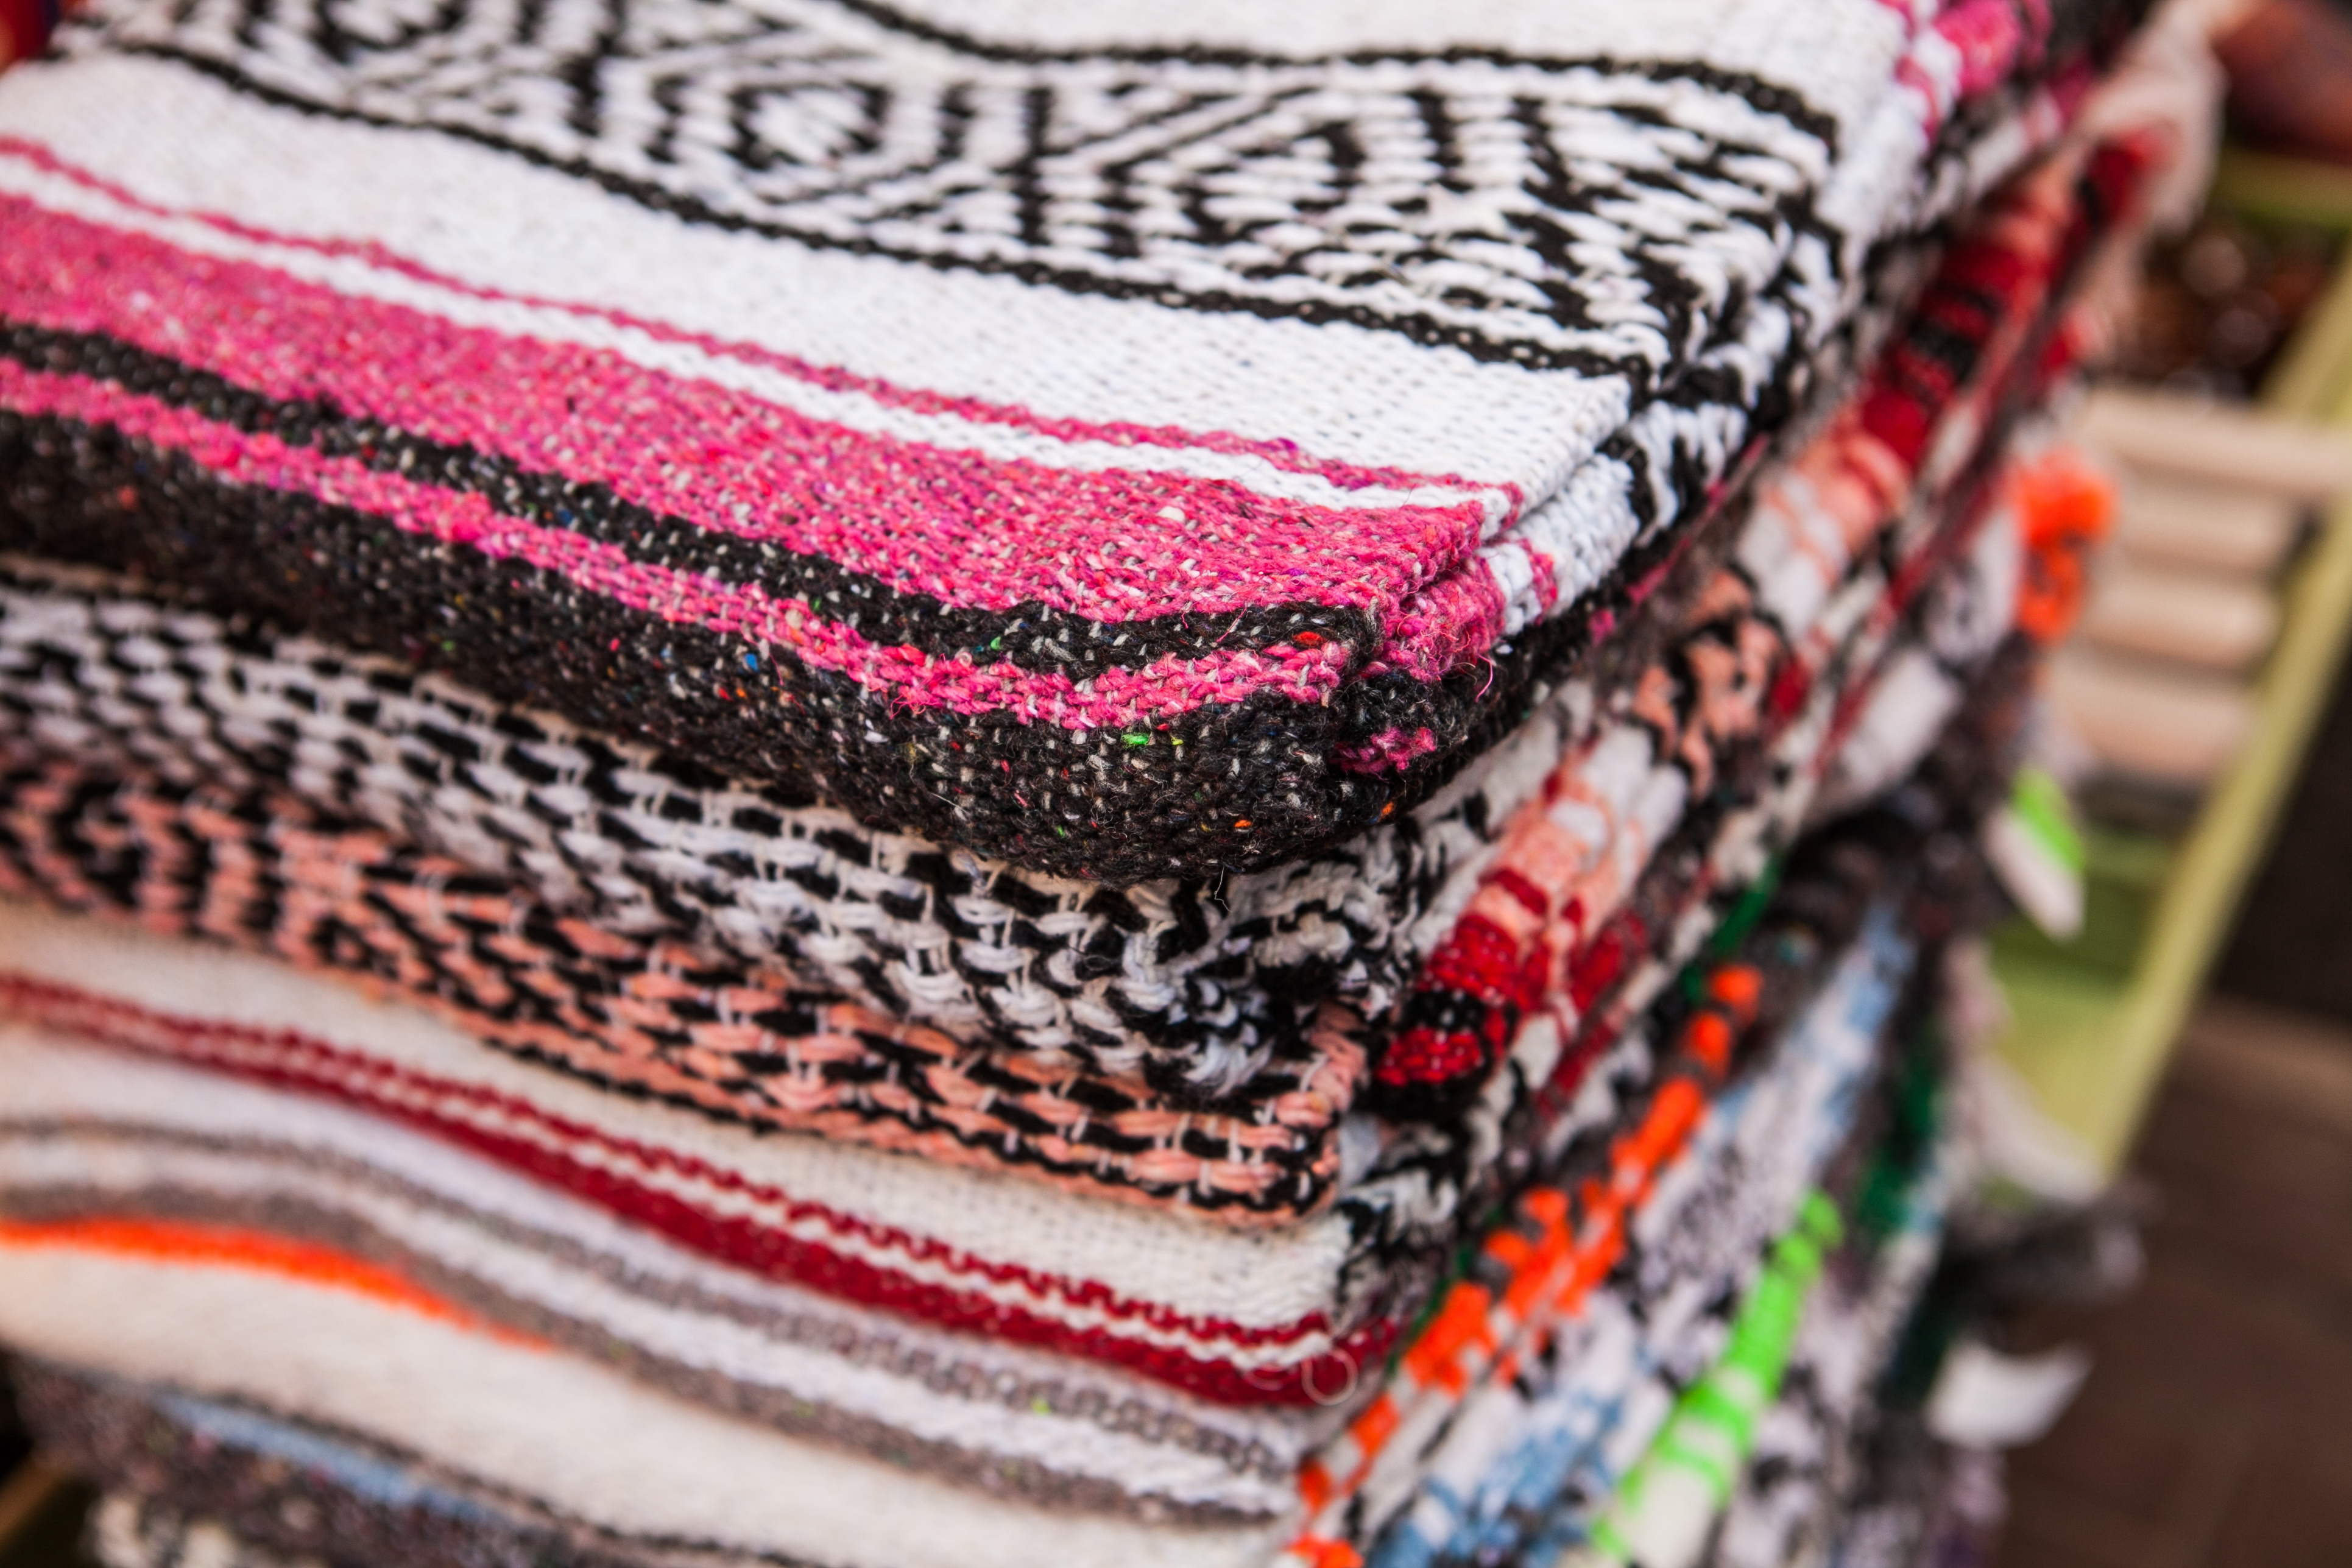 Wash your Mexican blanket separately initially to prevent color bleeding and avoid damage to other fabric. | Source: Shutterstock